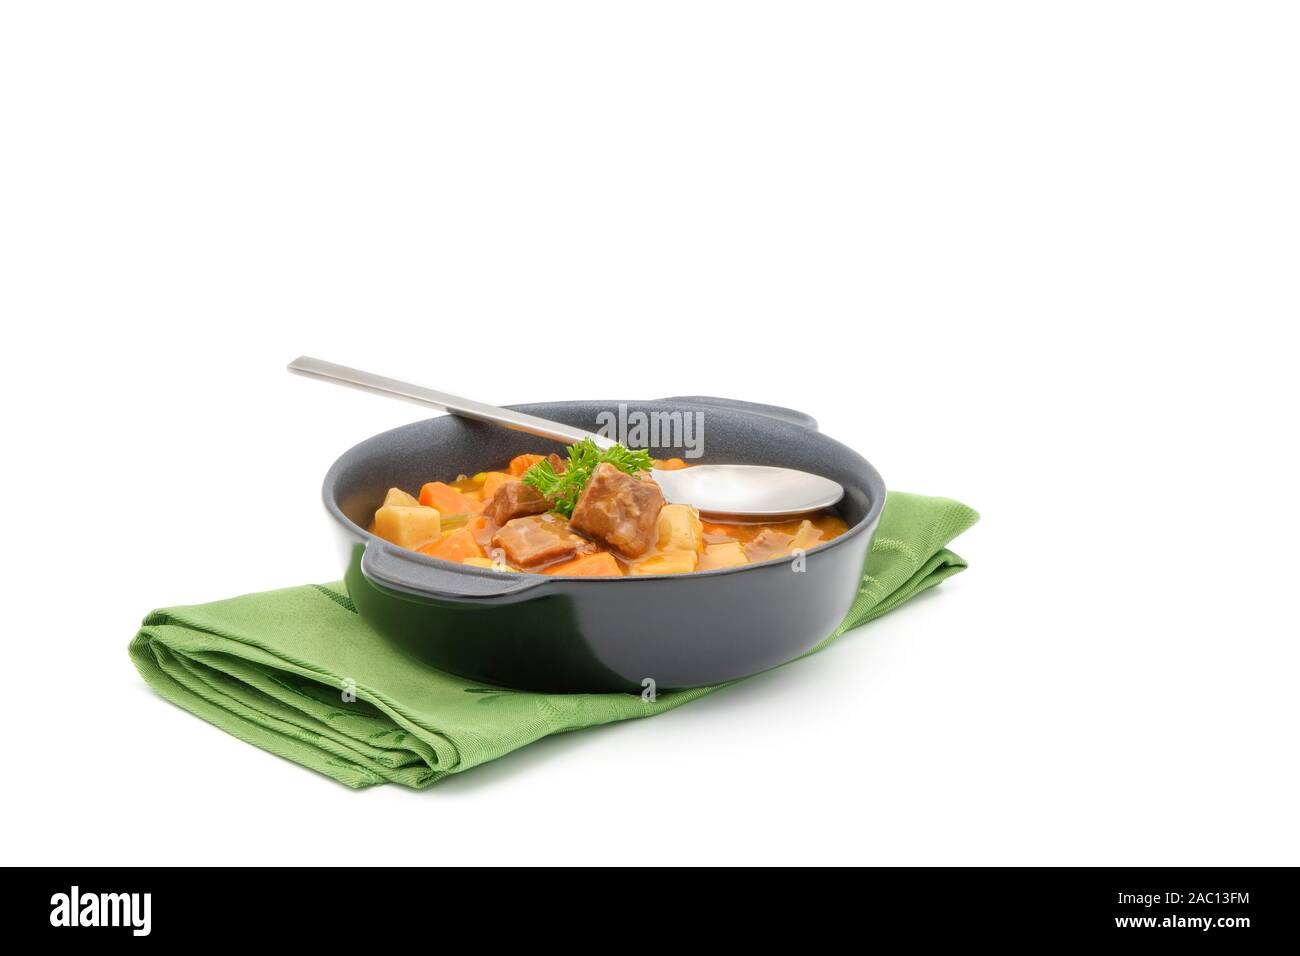 Bowl of hearty beef stew on a green napkin on a white background. Stock Photo